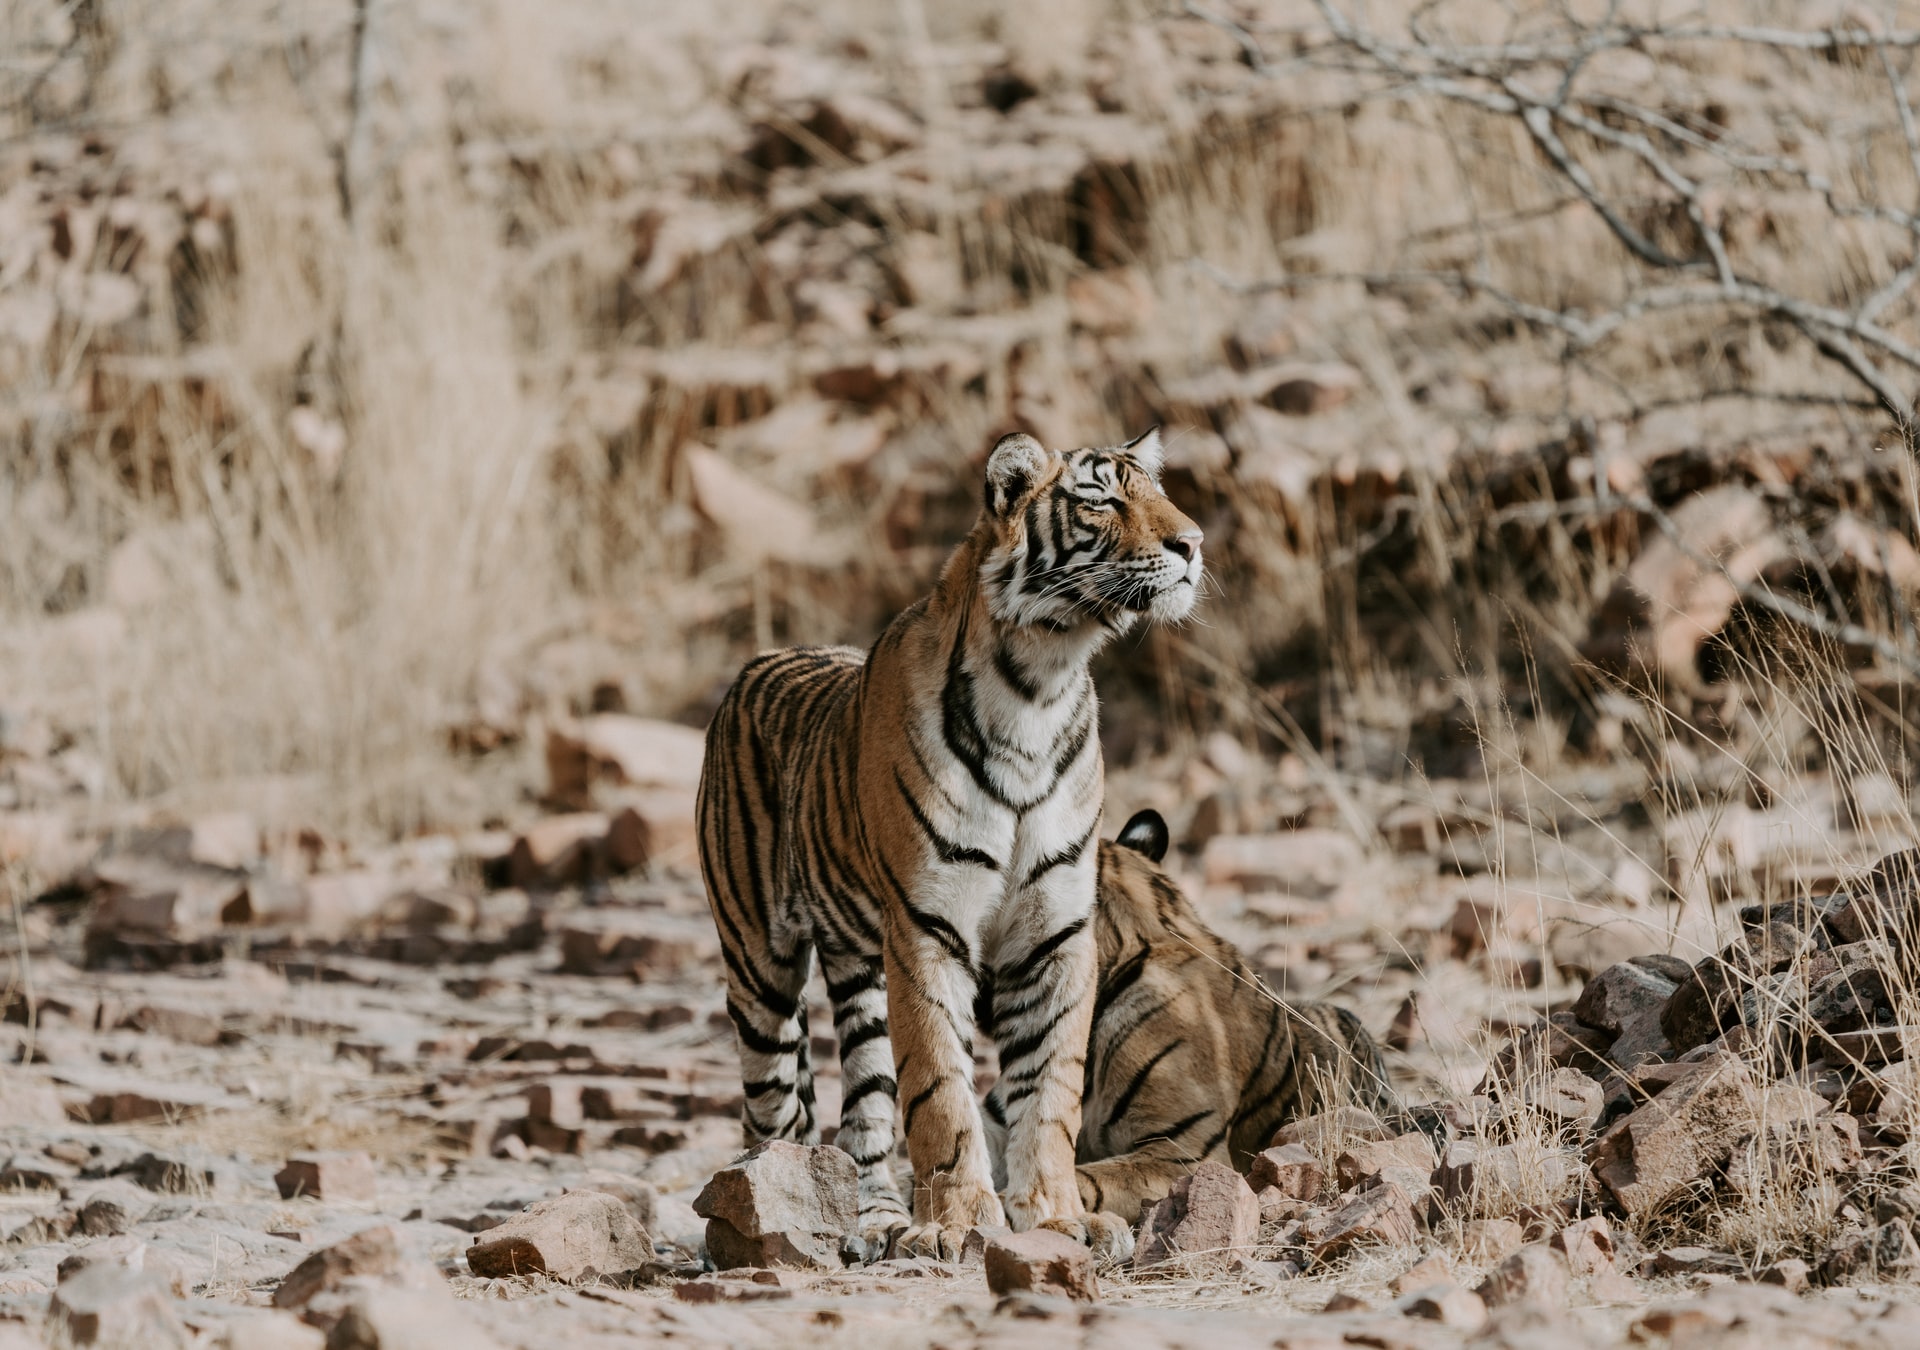 Tiger in the wild at Ranthambore National Park, India